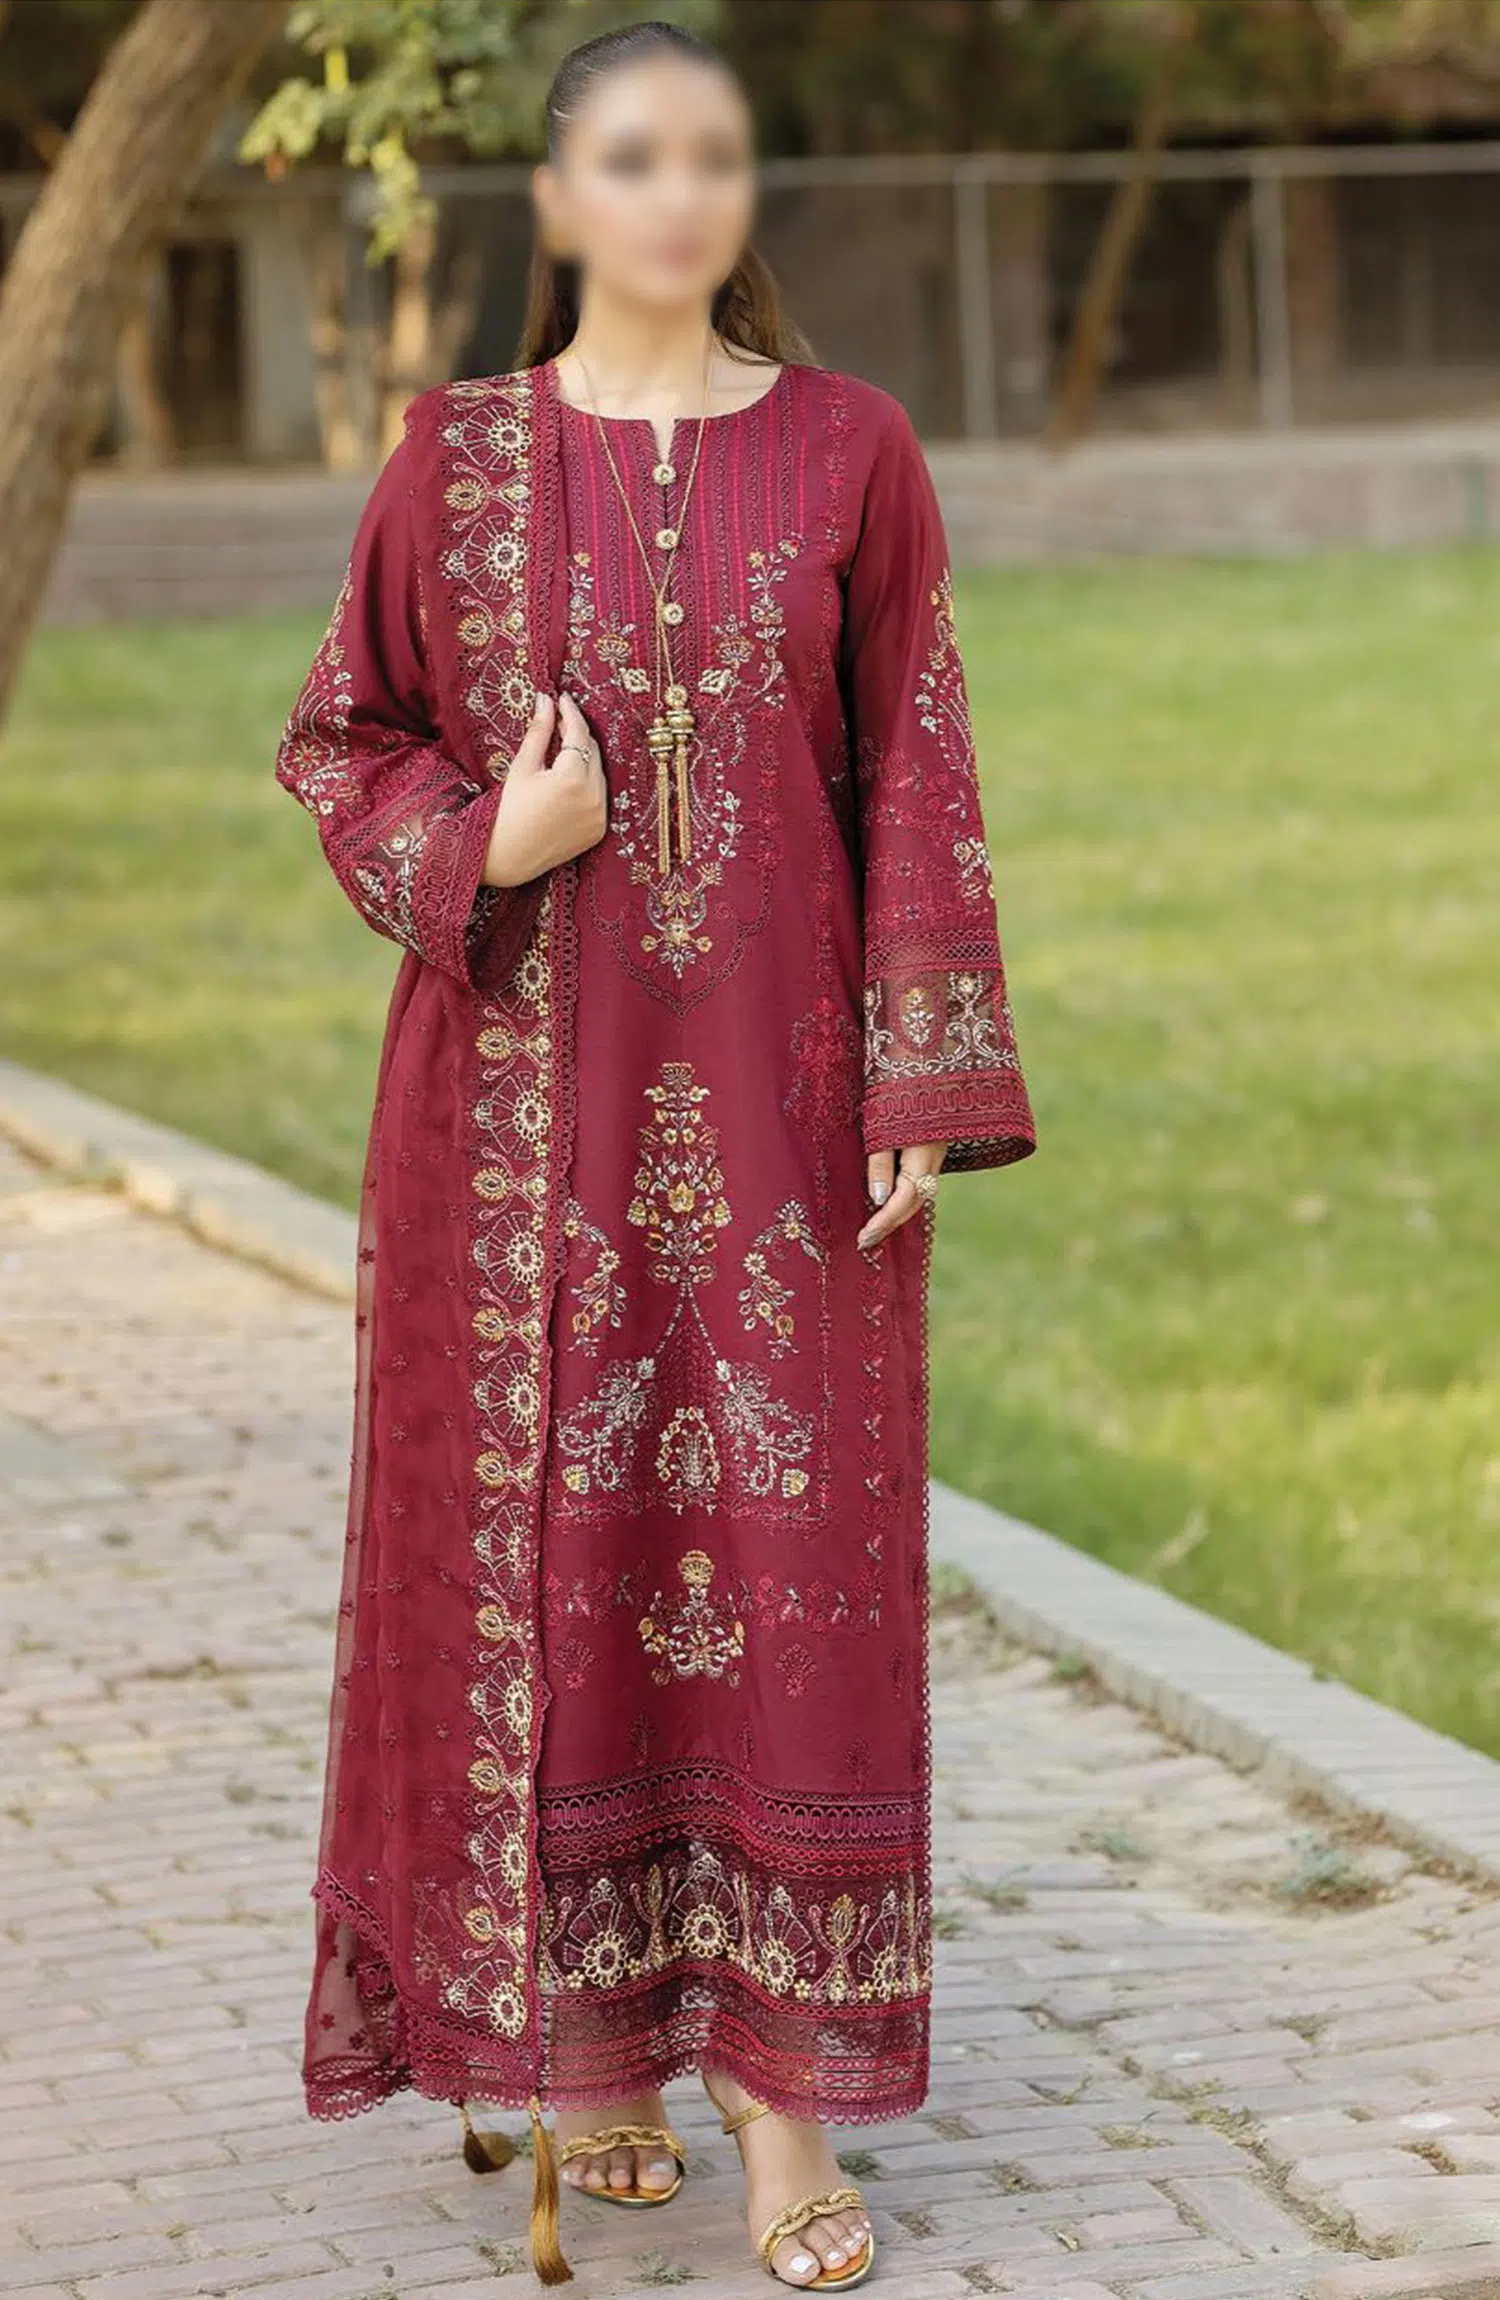 Subah-e-Roshan Luxury Lawn Collection by Serene - SL 74 FIRDOUS